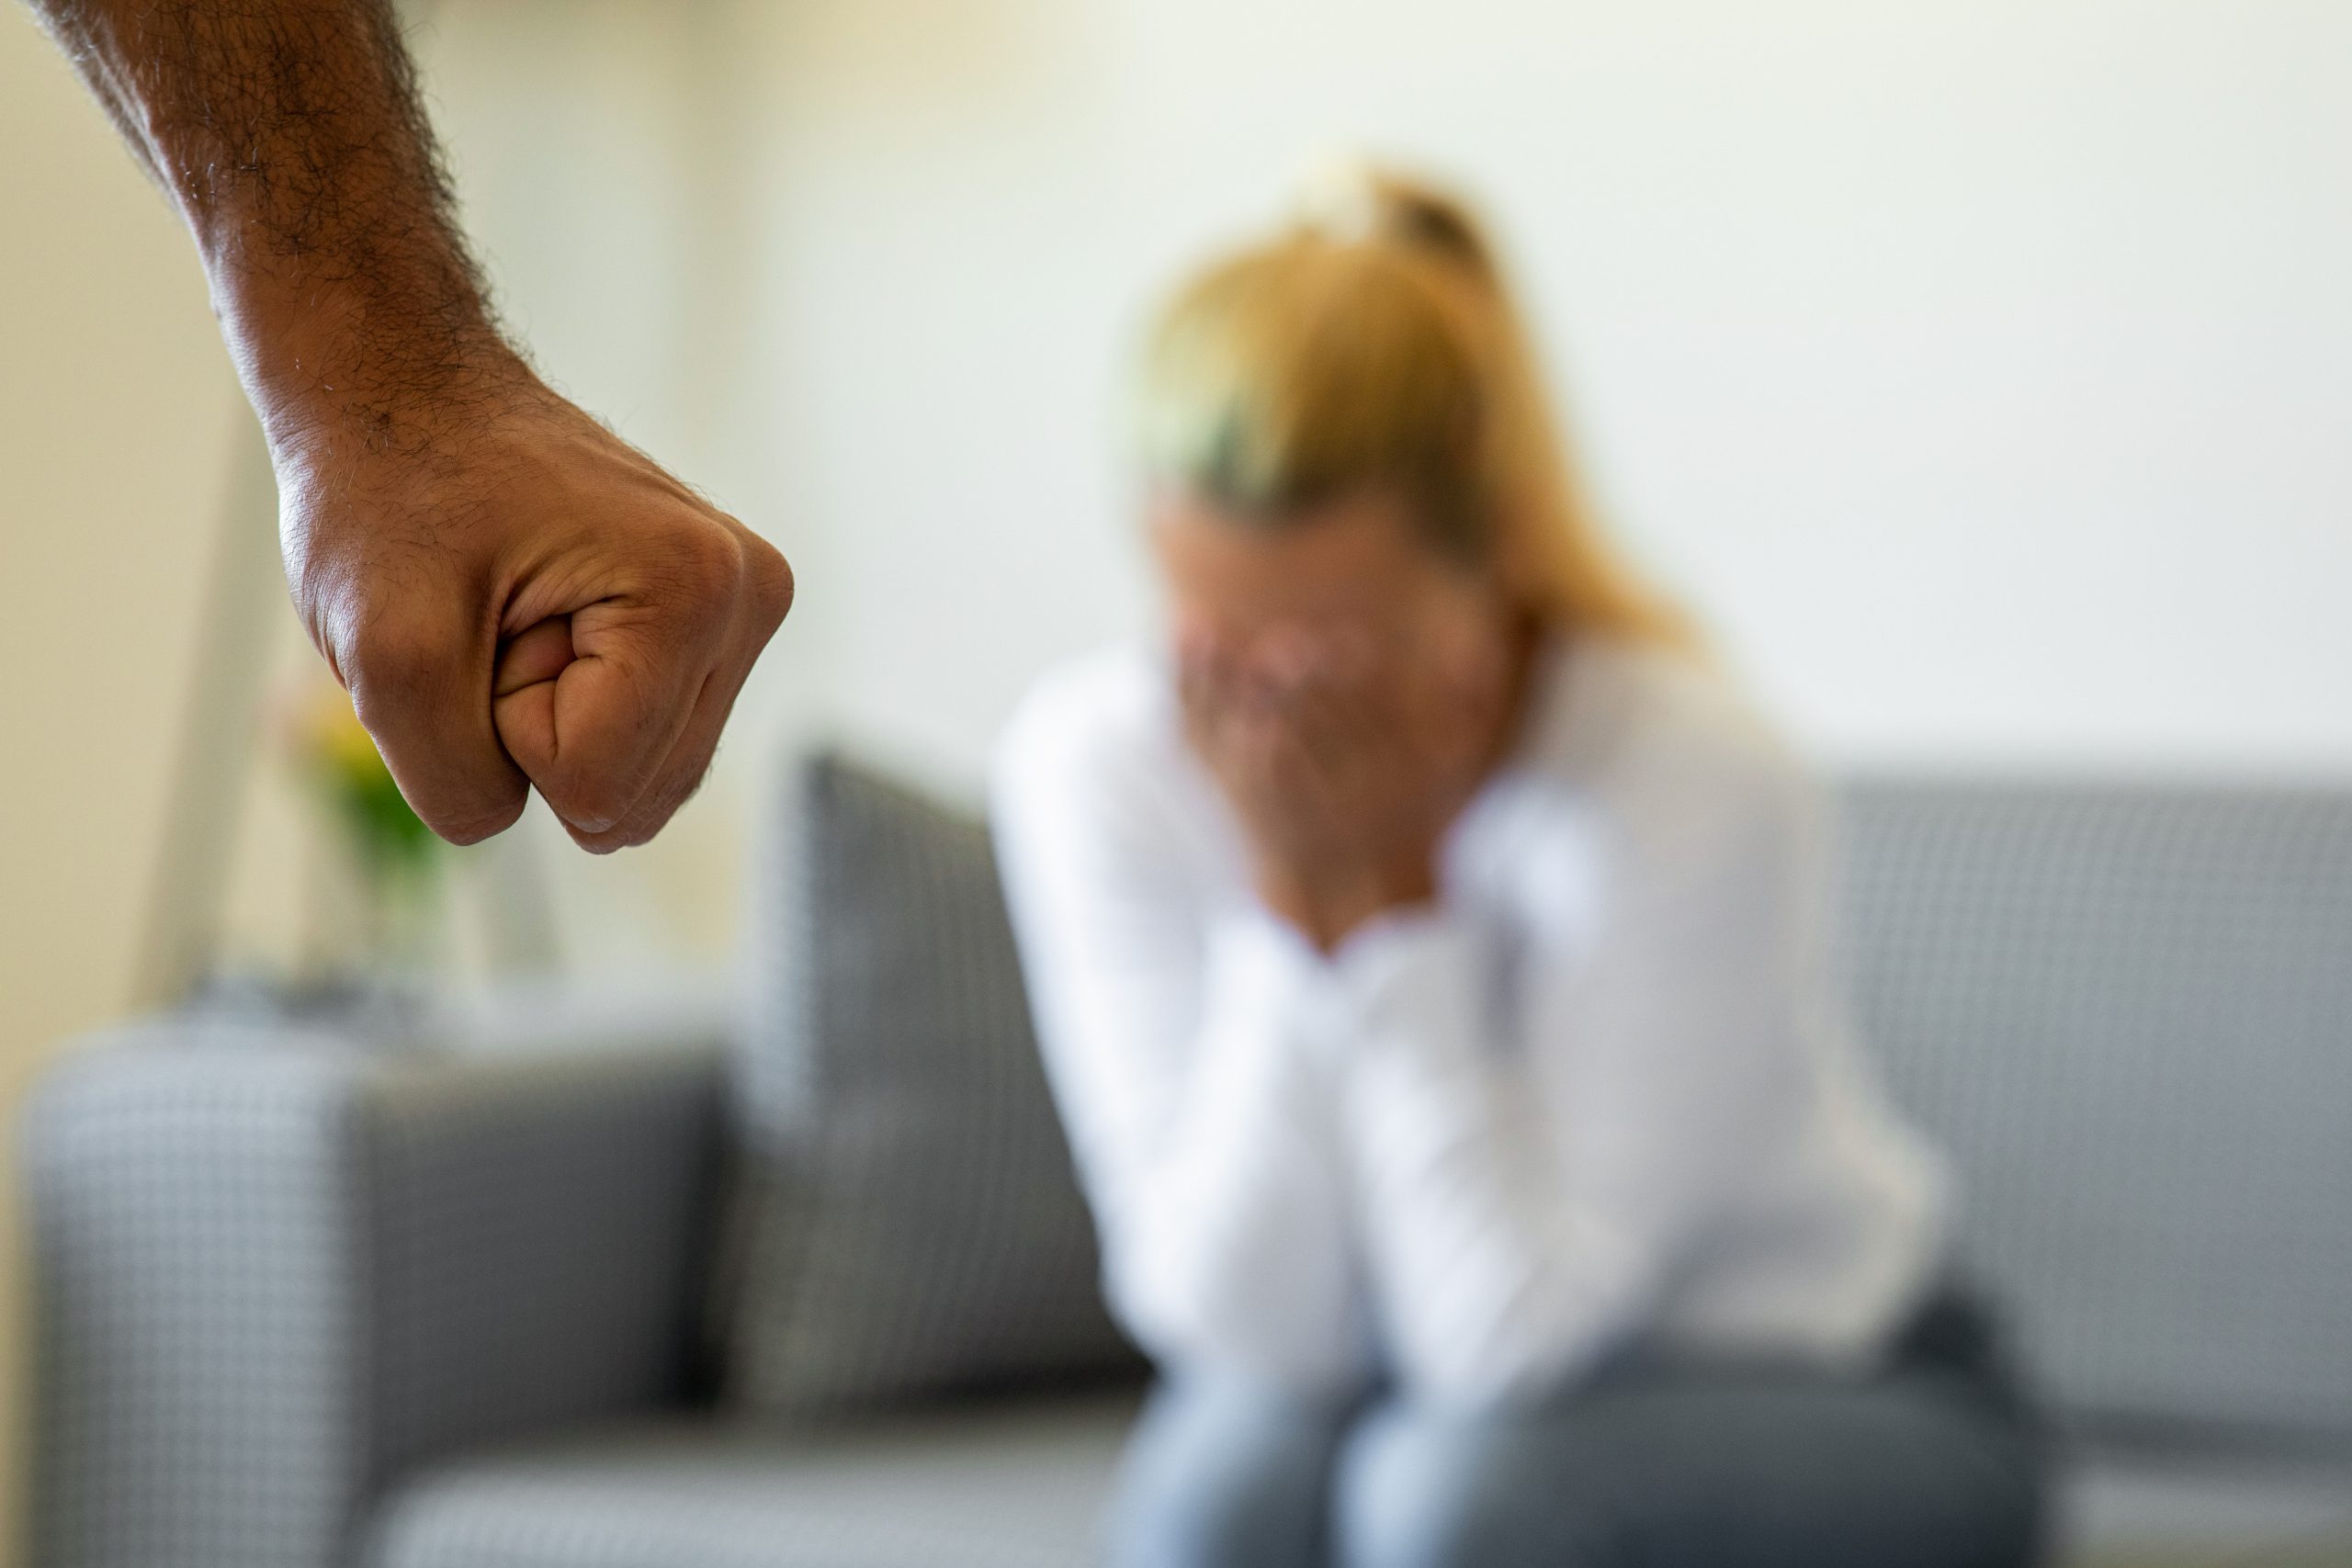 How To Leave A Physically Abusive Relationship Safely